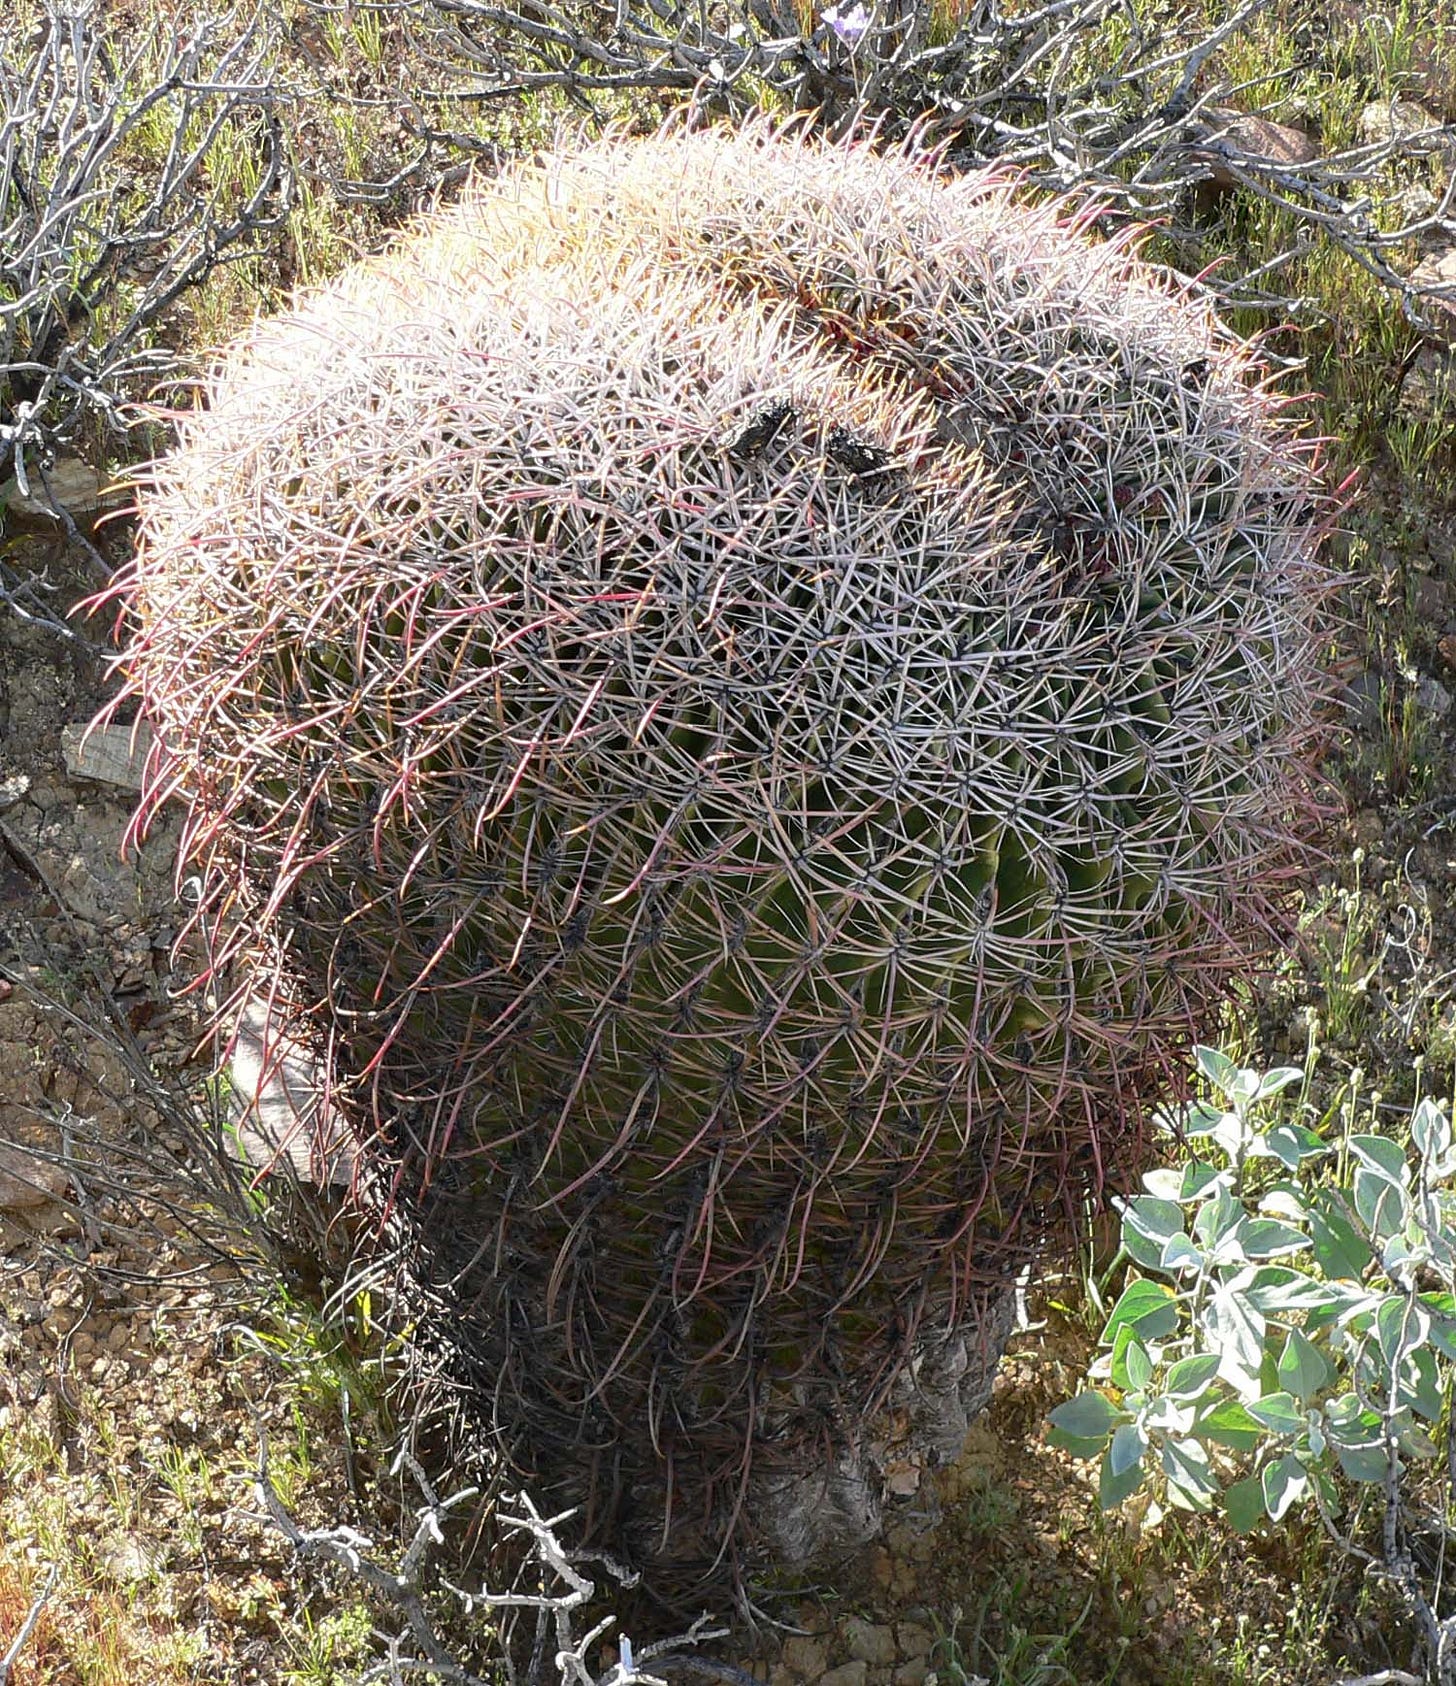 A strange looking cactus with a bulbous top.